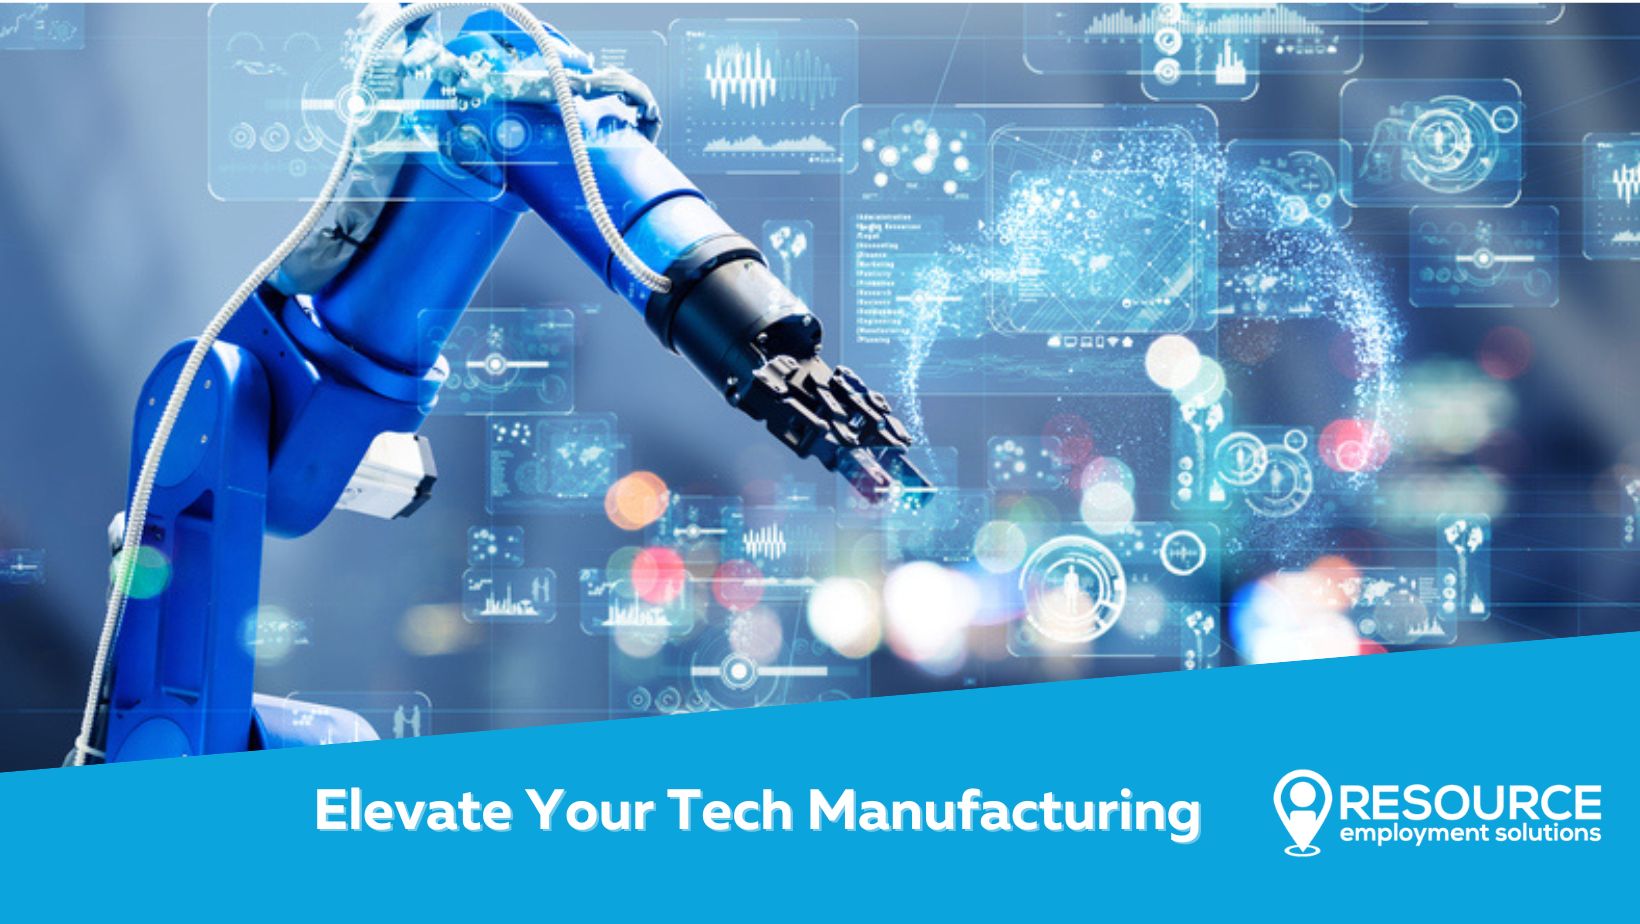  Elevate Your Tech Manufacturing: Unleash Human Capital Potential with Resource Employment Solutions